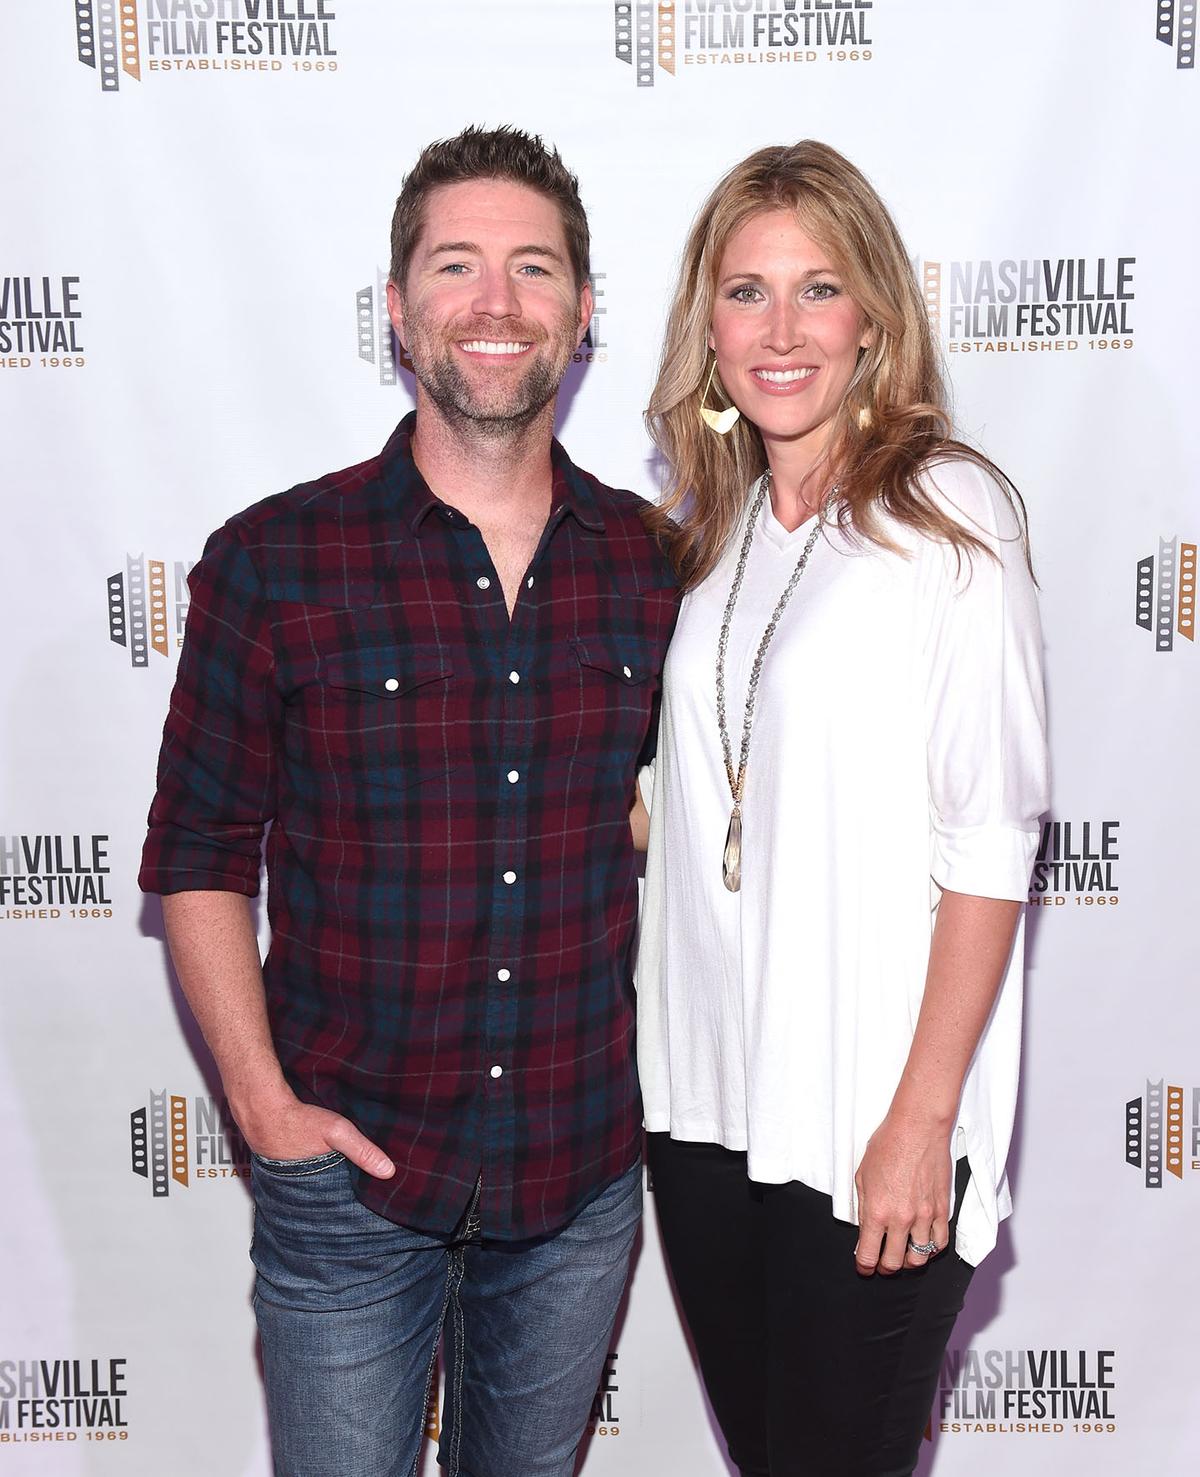 Josh Turner and his wife Jennifer at the 49th Annual Nashville Film Festival, 2018. (Kempin/Getty Images)